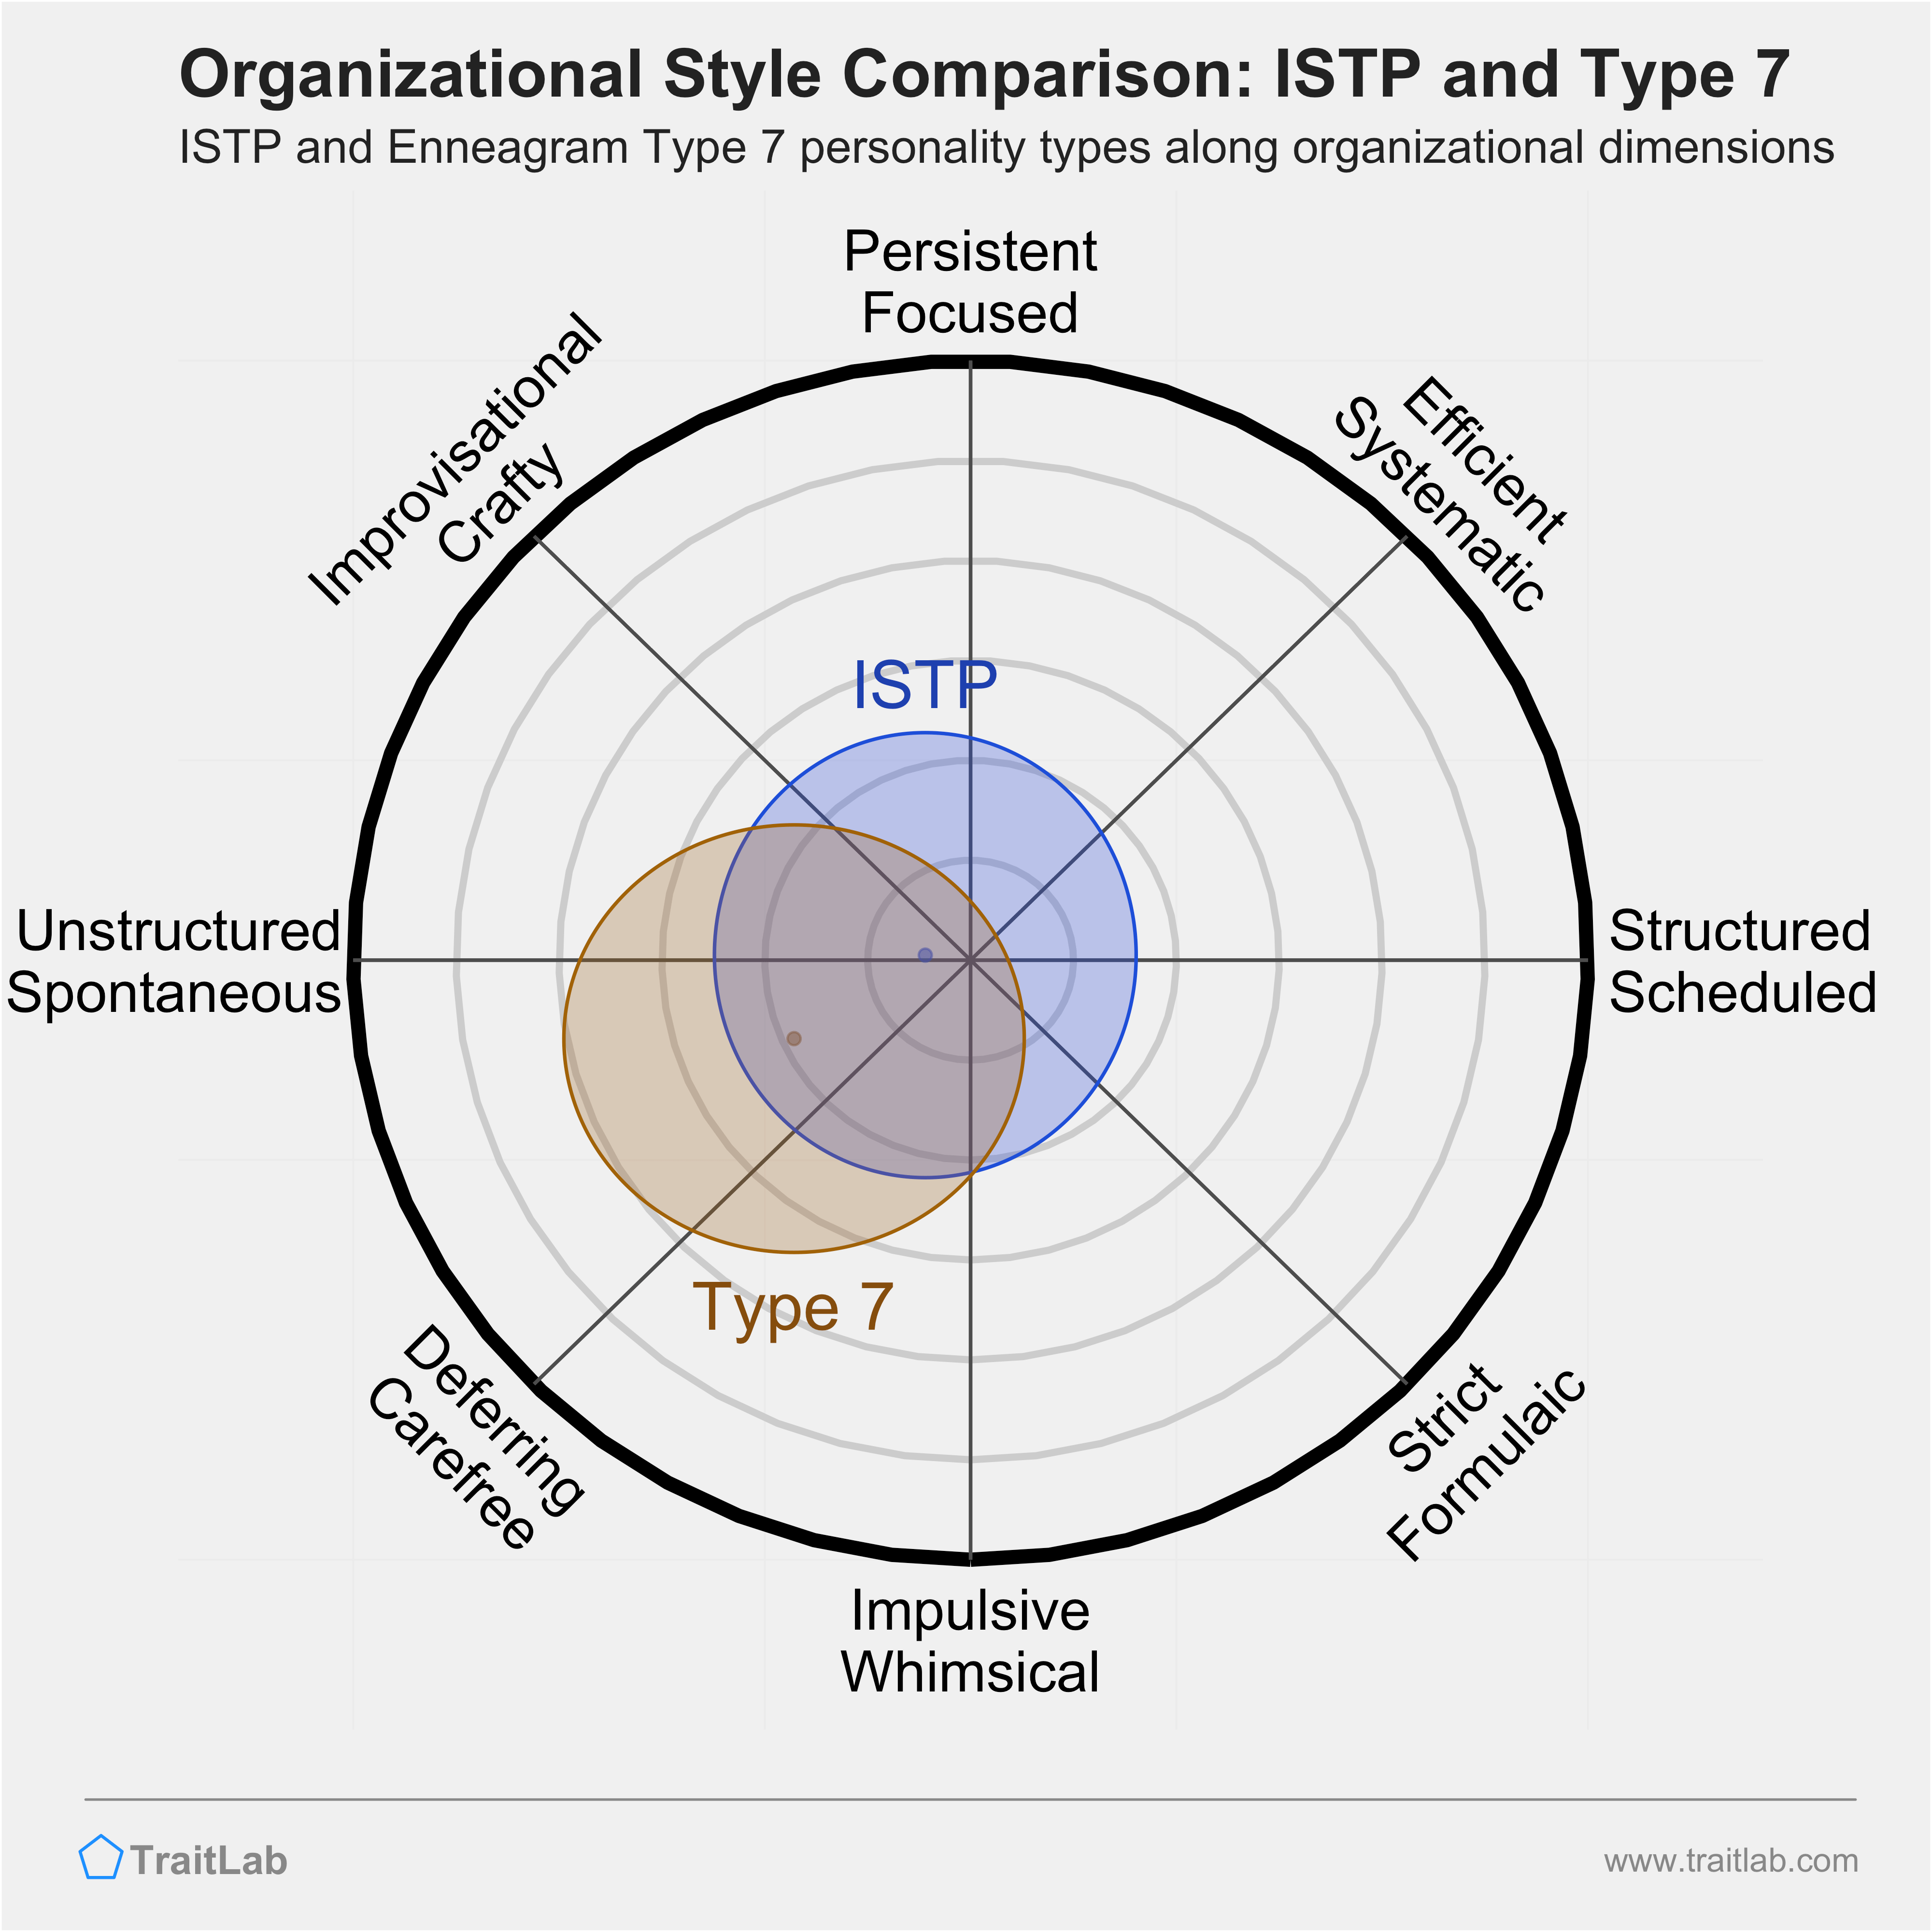 ISTP and Type 7 comparison across organizational dimensions